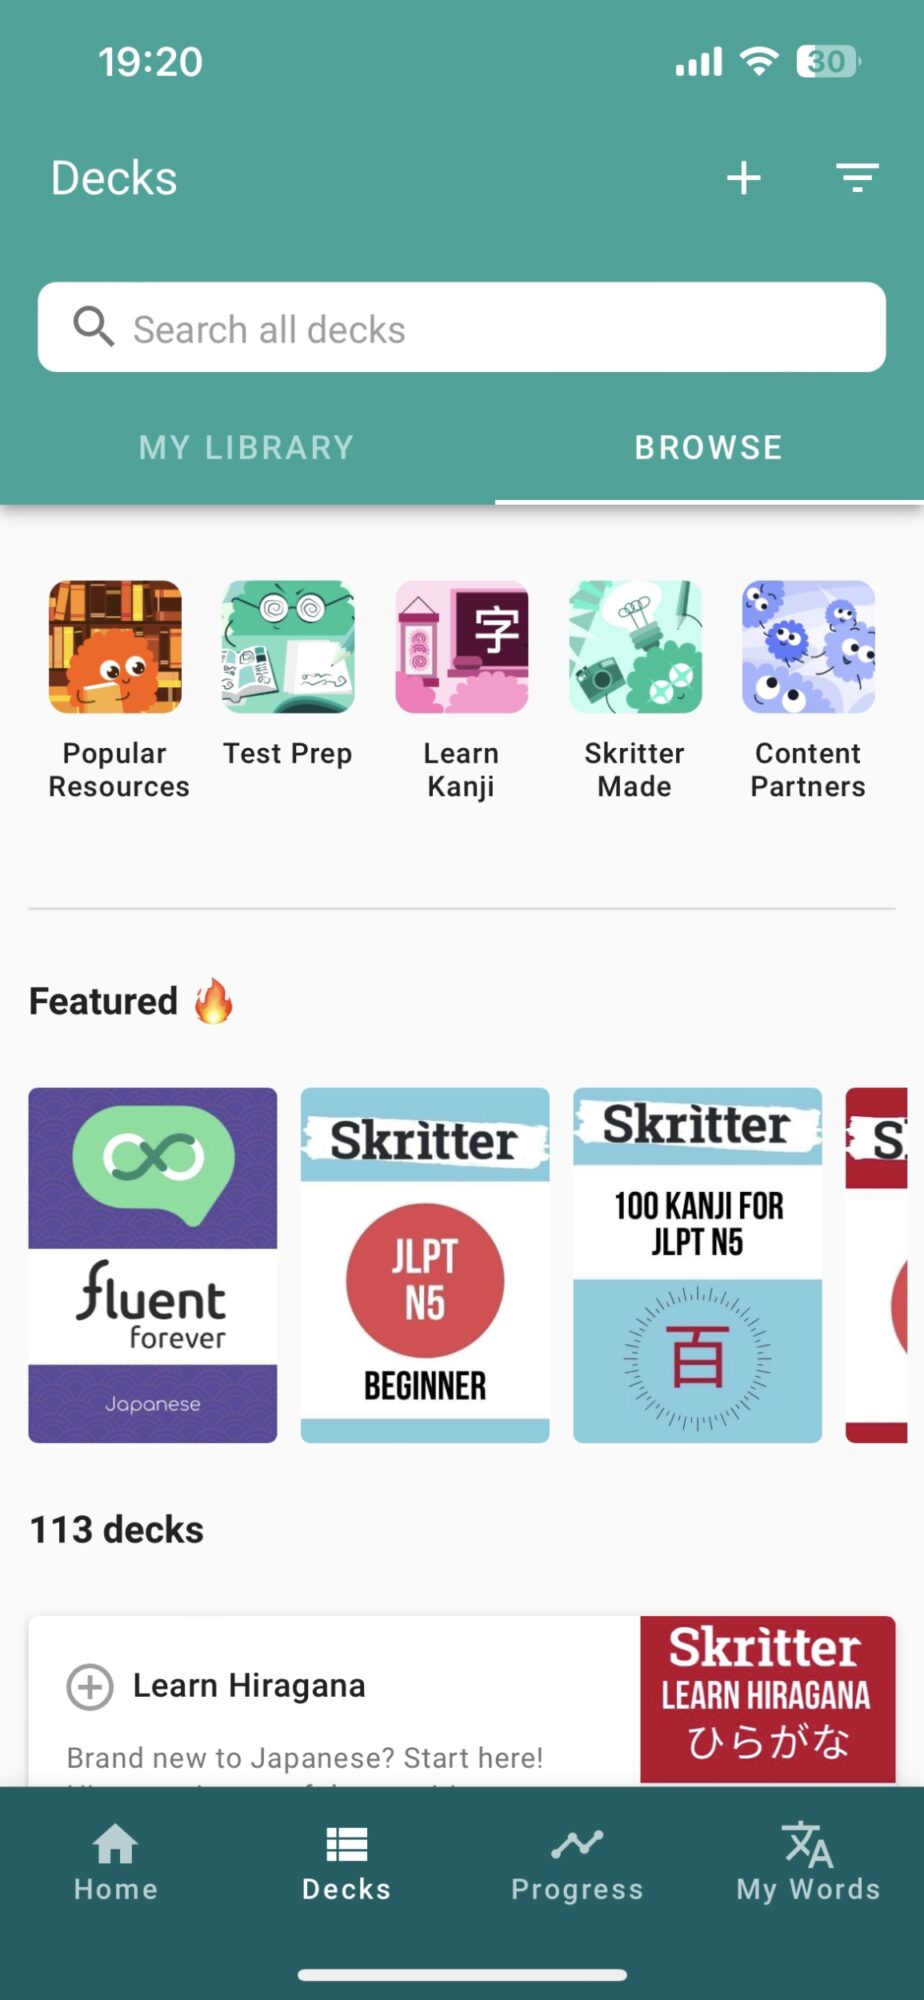 A screenshot of the browse tab in the decks section on the Skritter app.